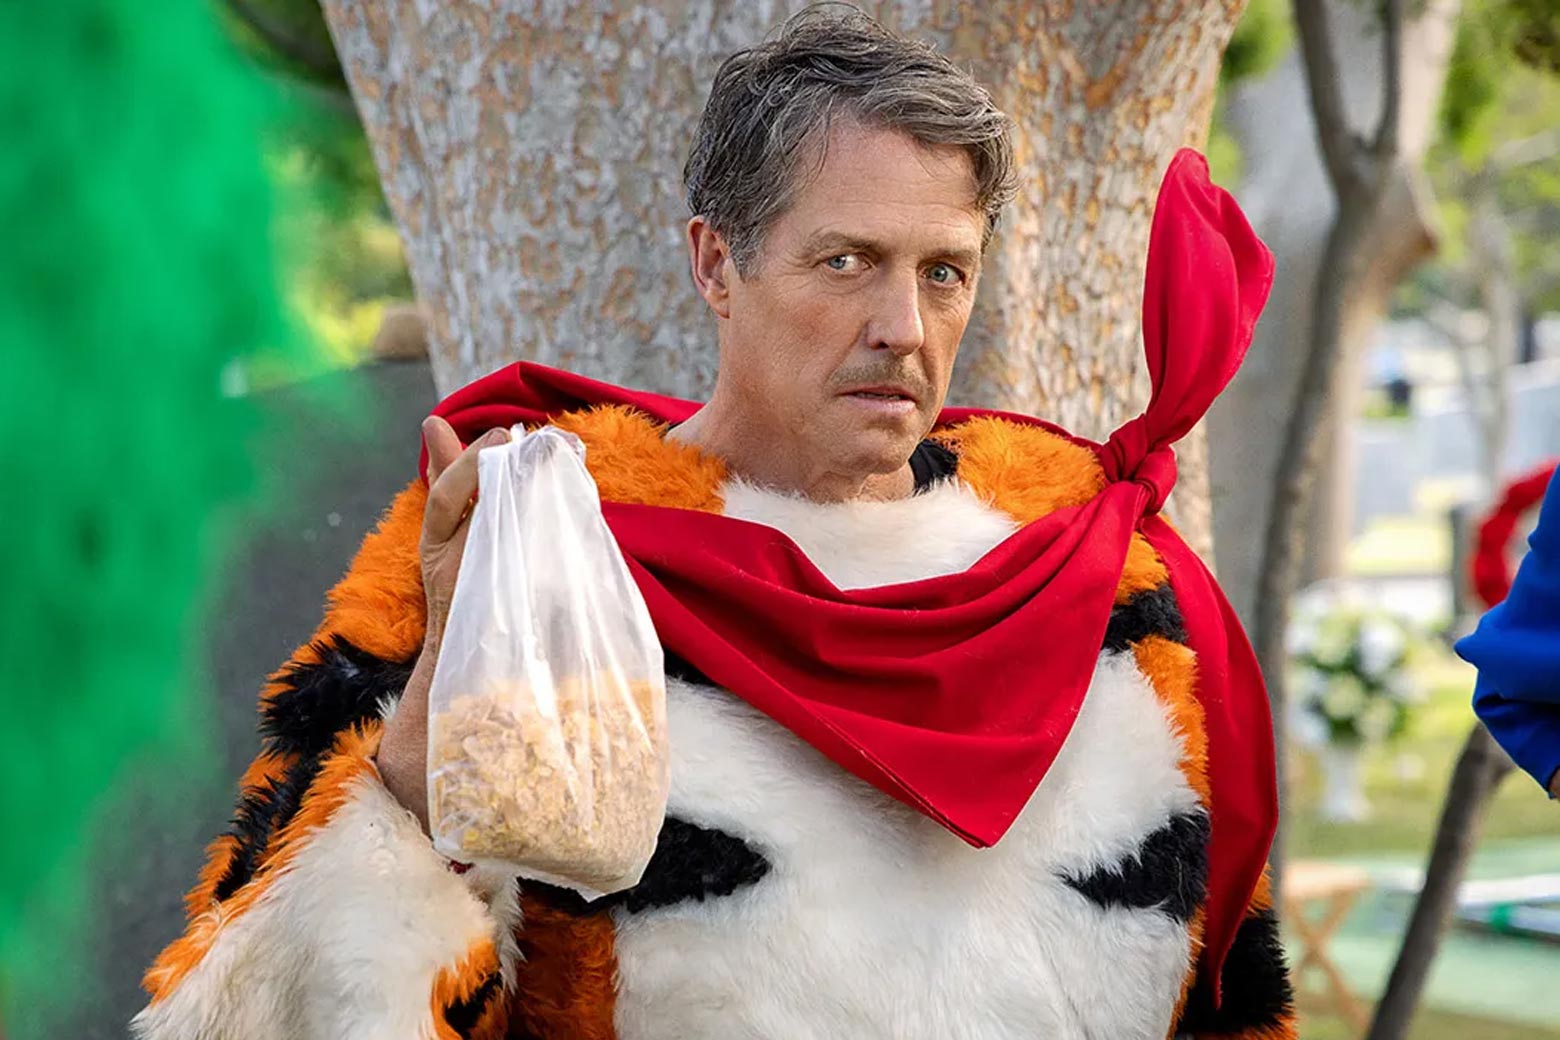 Hugh Grant makes a comical face as Thurl Ravenscroft wearing part of a Tony the Tiger costume.